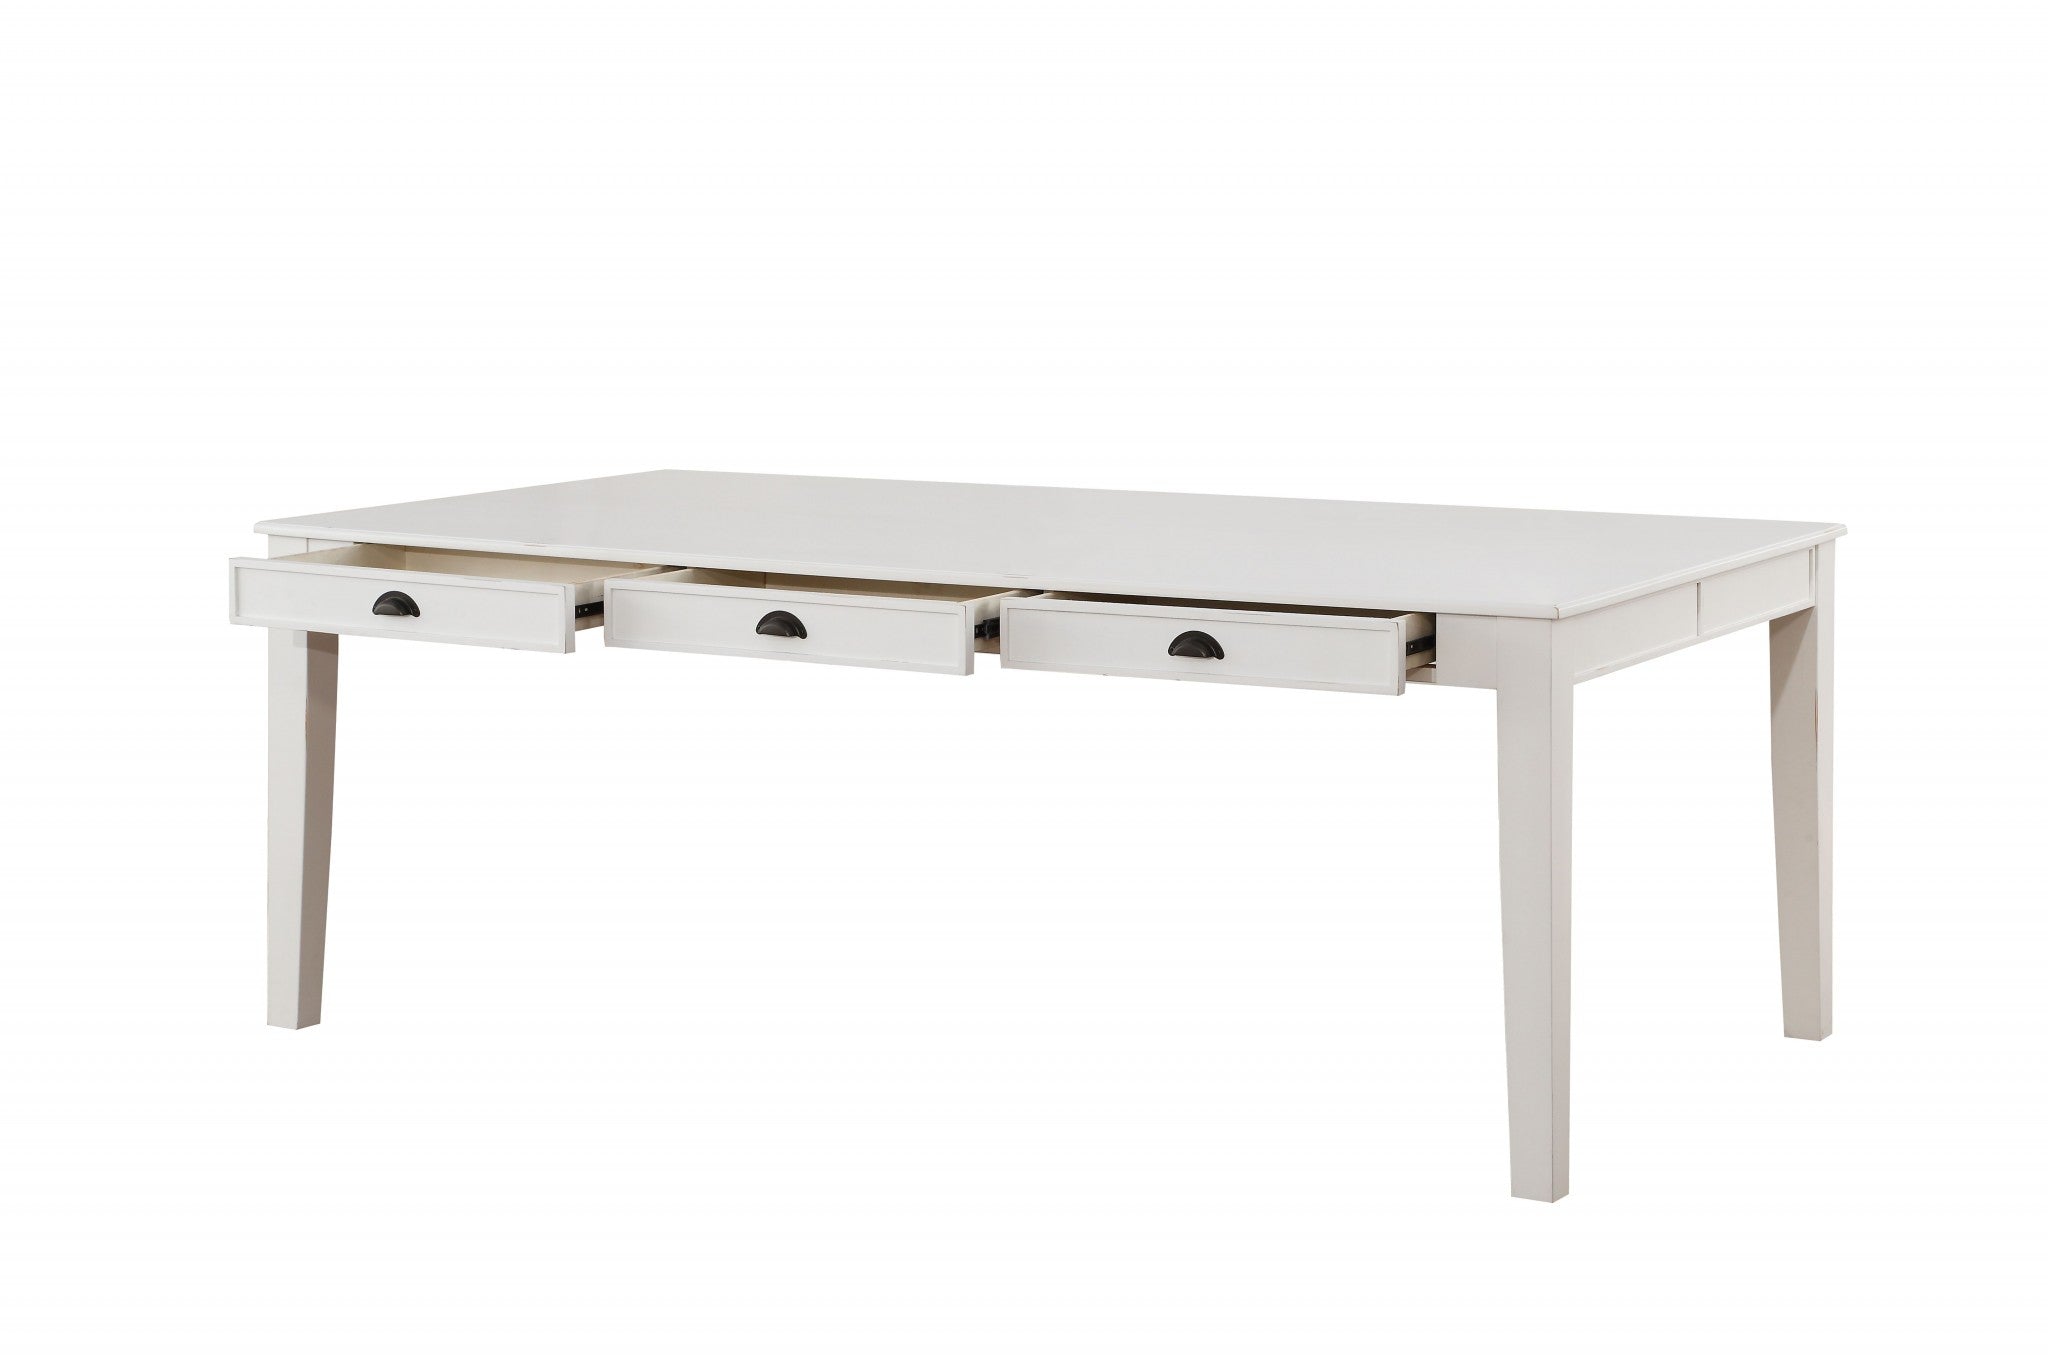 78" White Solid Wood Dining Table